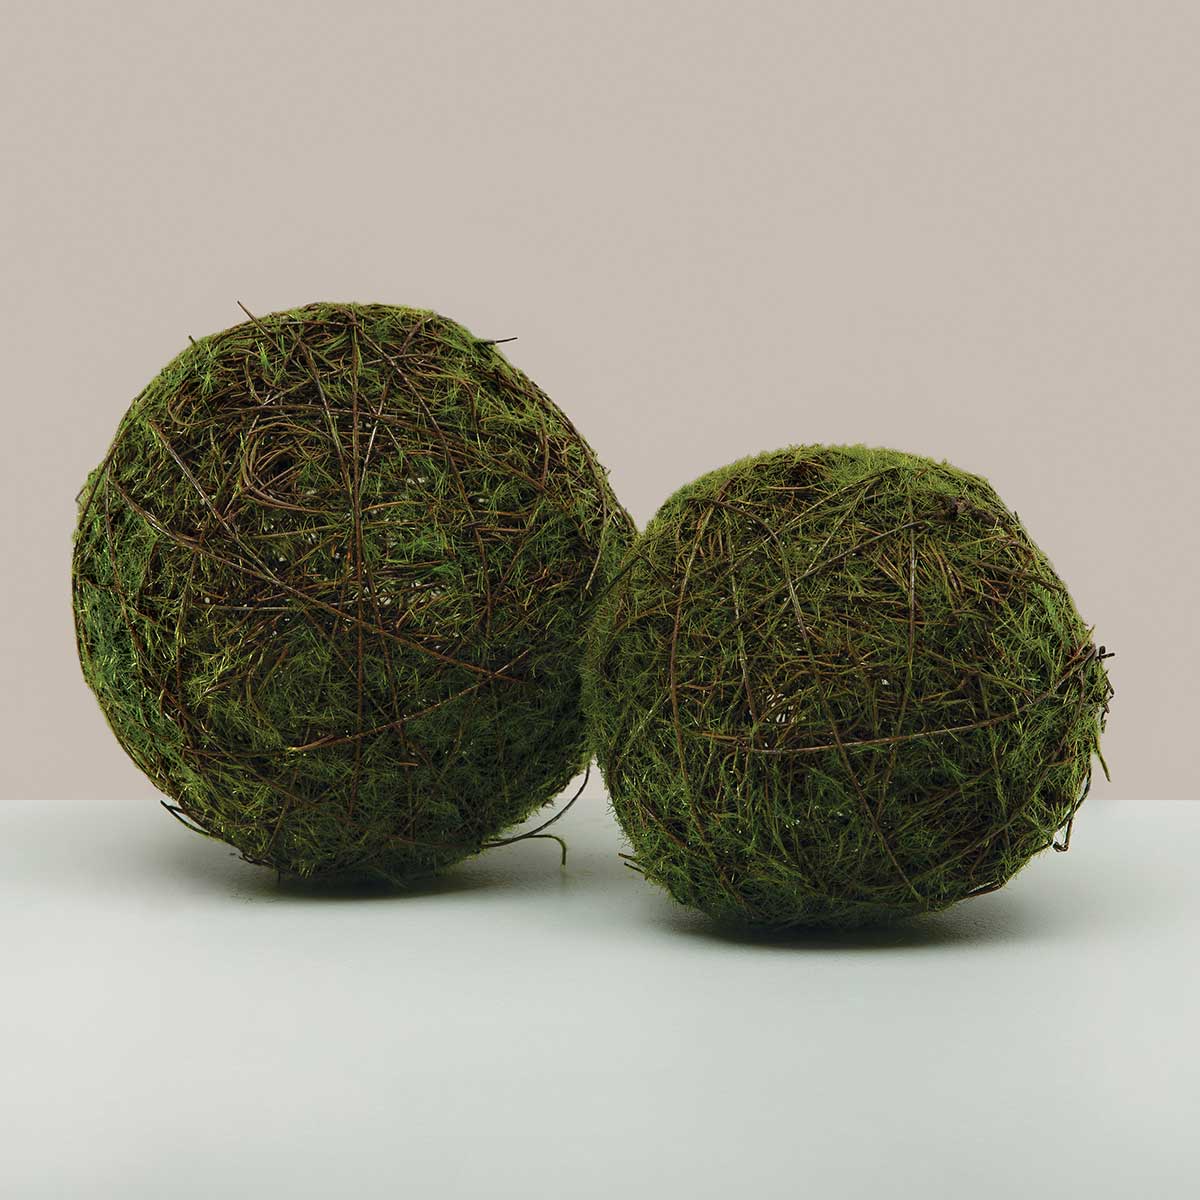 MOSSY TWIG BALL SMALL 3.5"